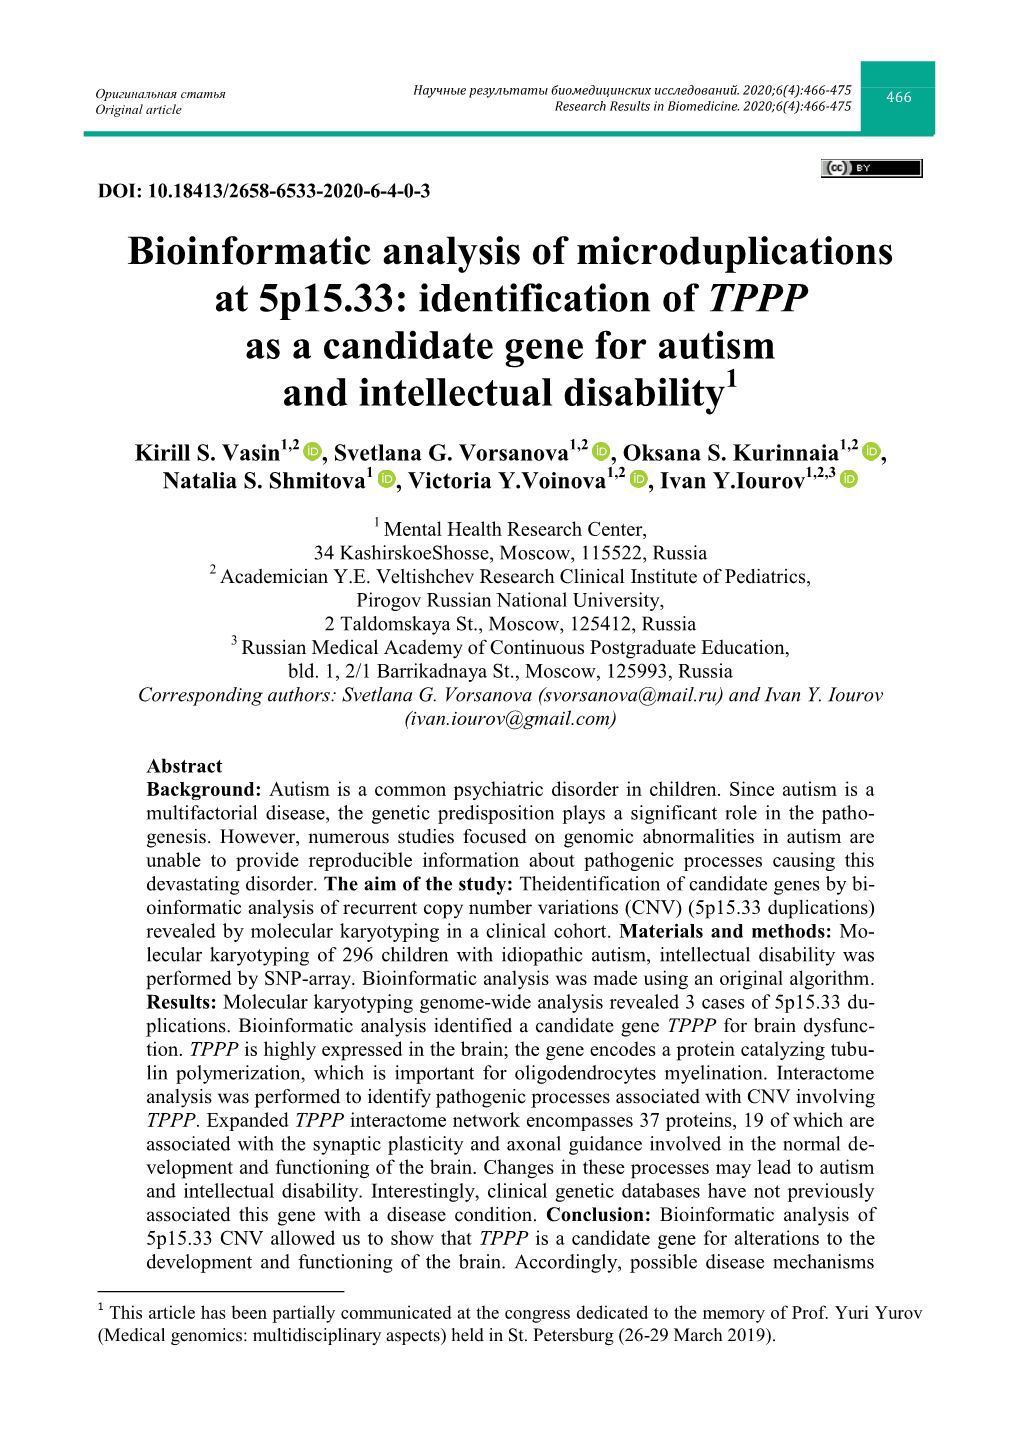 Bioinformatic Analysis of Microduplications at 5P15.33: Identification of TPPP As a Candidate Gene for Autism and Intellectual Disability1